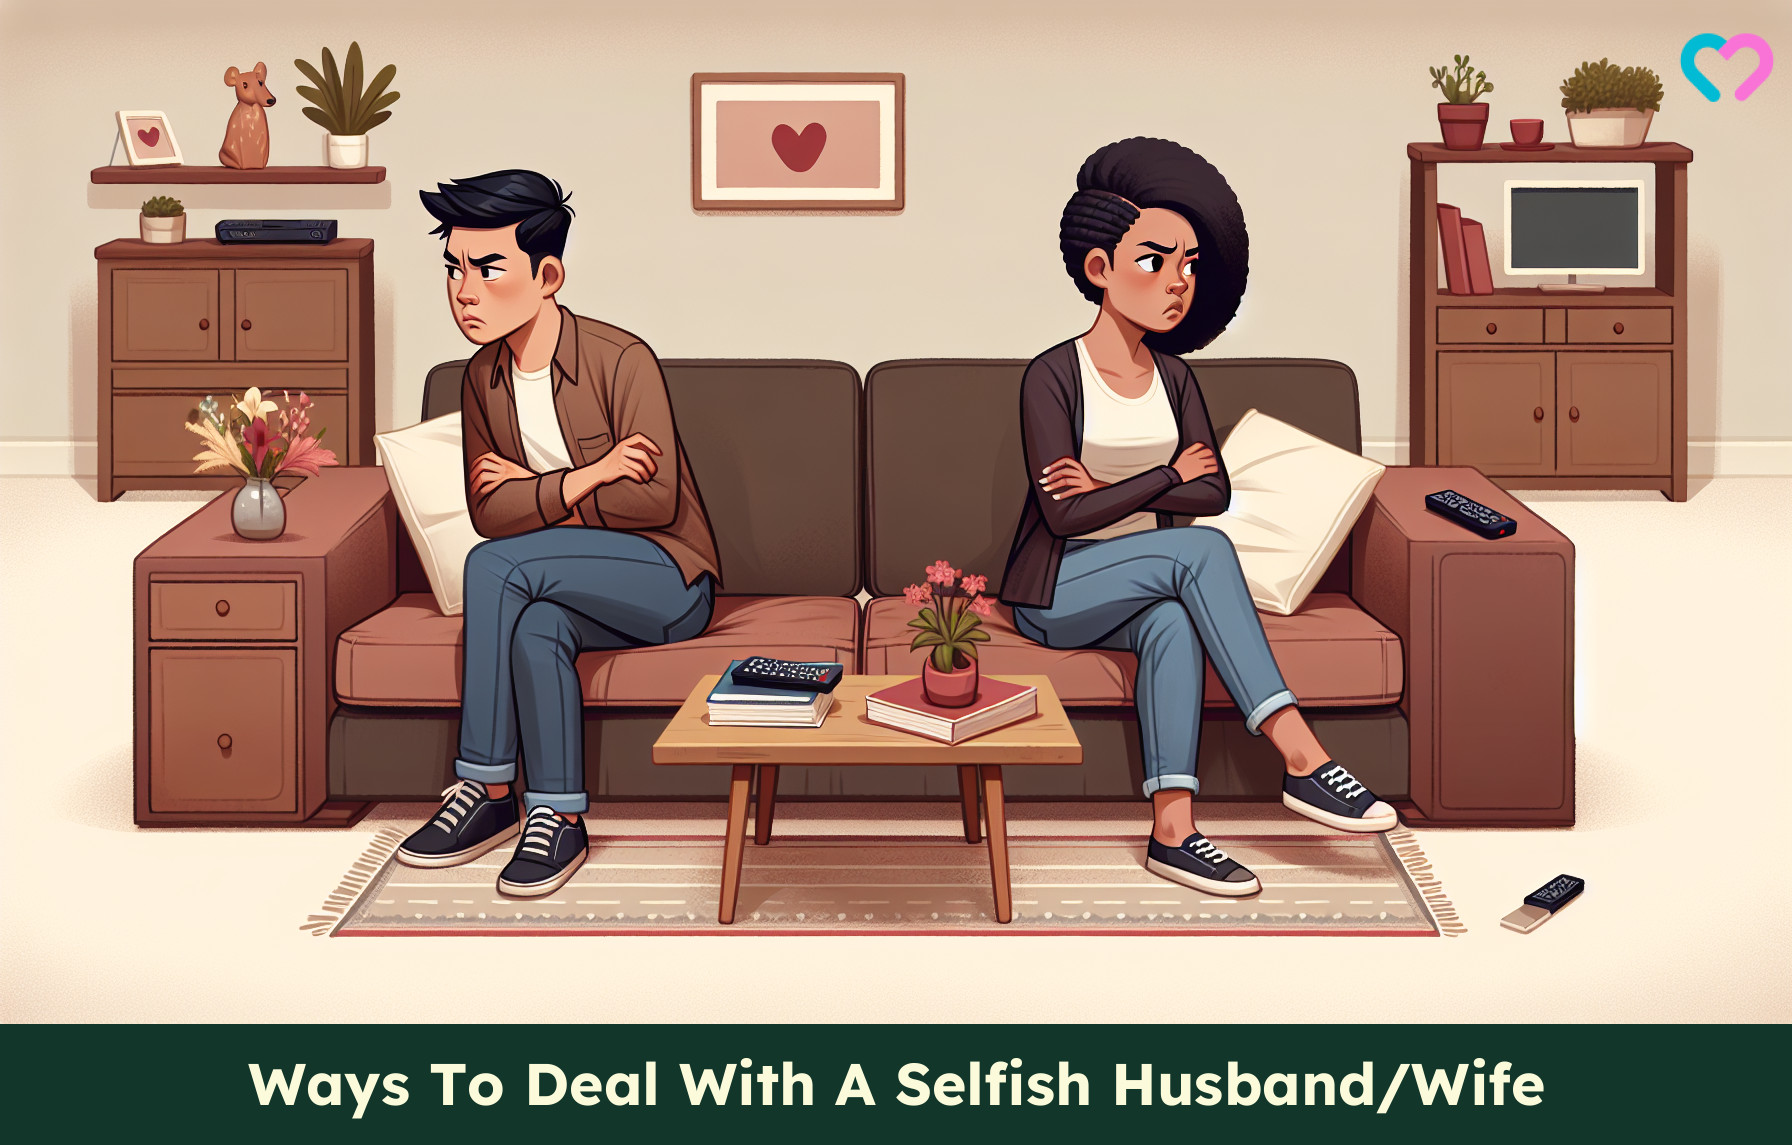 how to deal with a selfish spouse_illustration